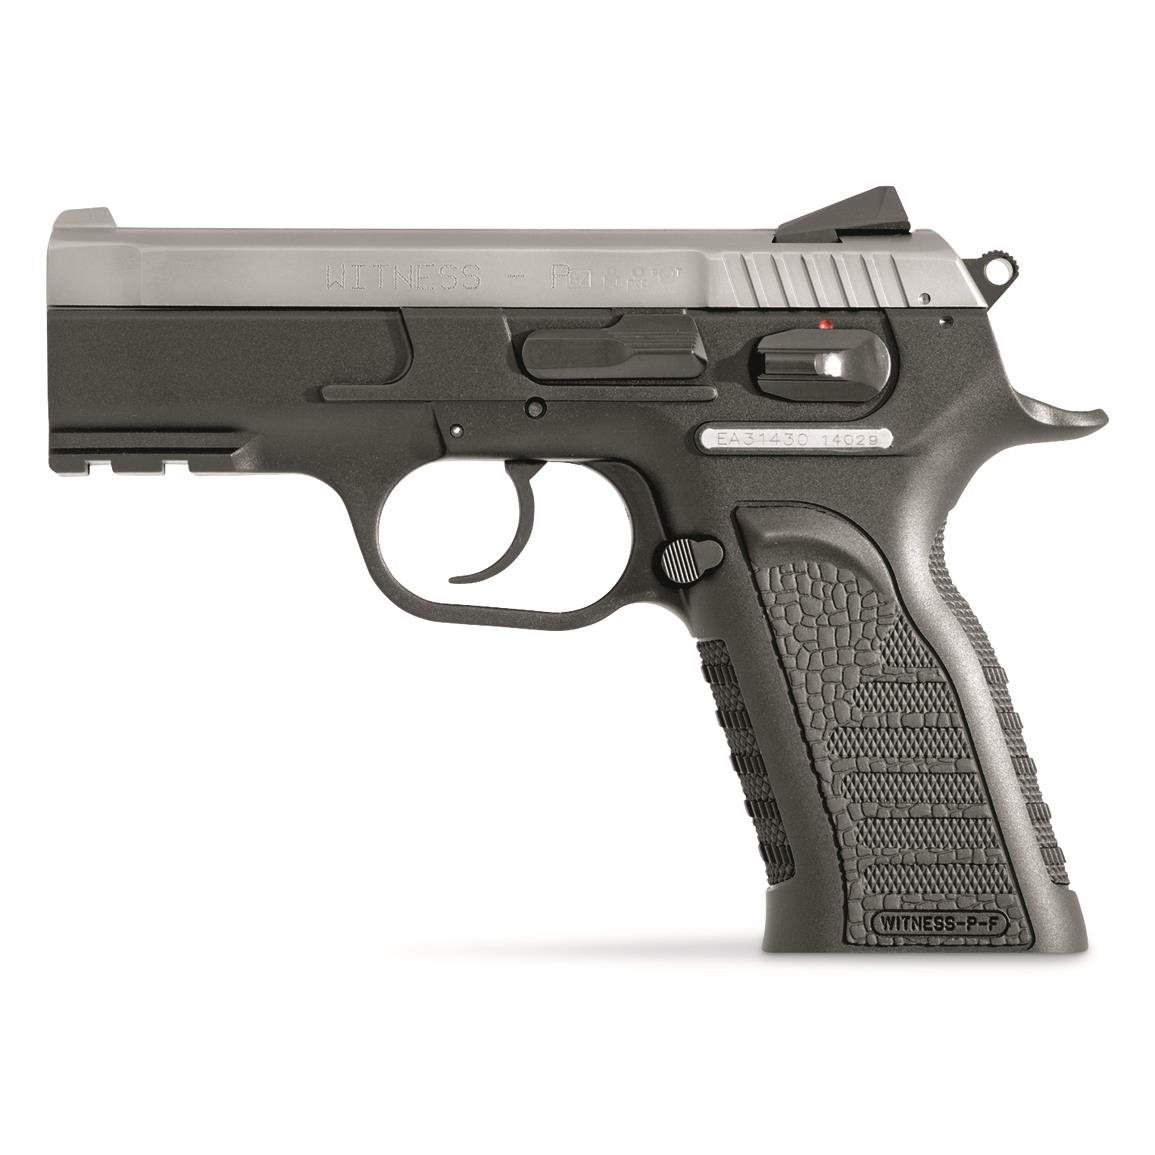 EAA Tanfoglio Witness Polymer Carry, Semi-automatic, 9mm, 3.6" Barrel, 17+1 Rounds